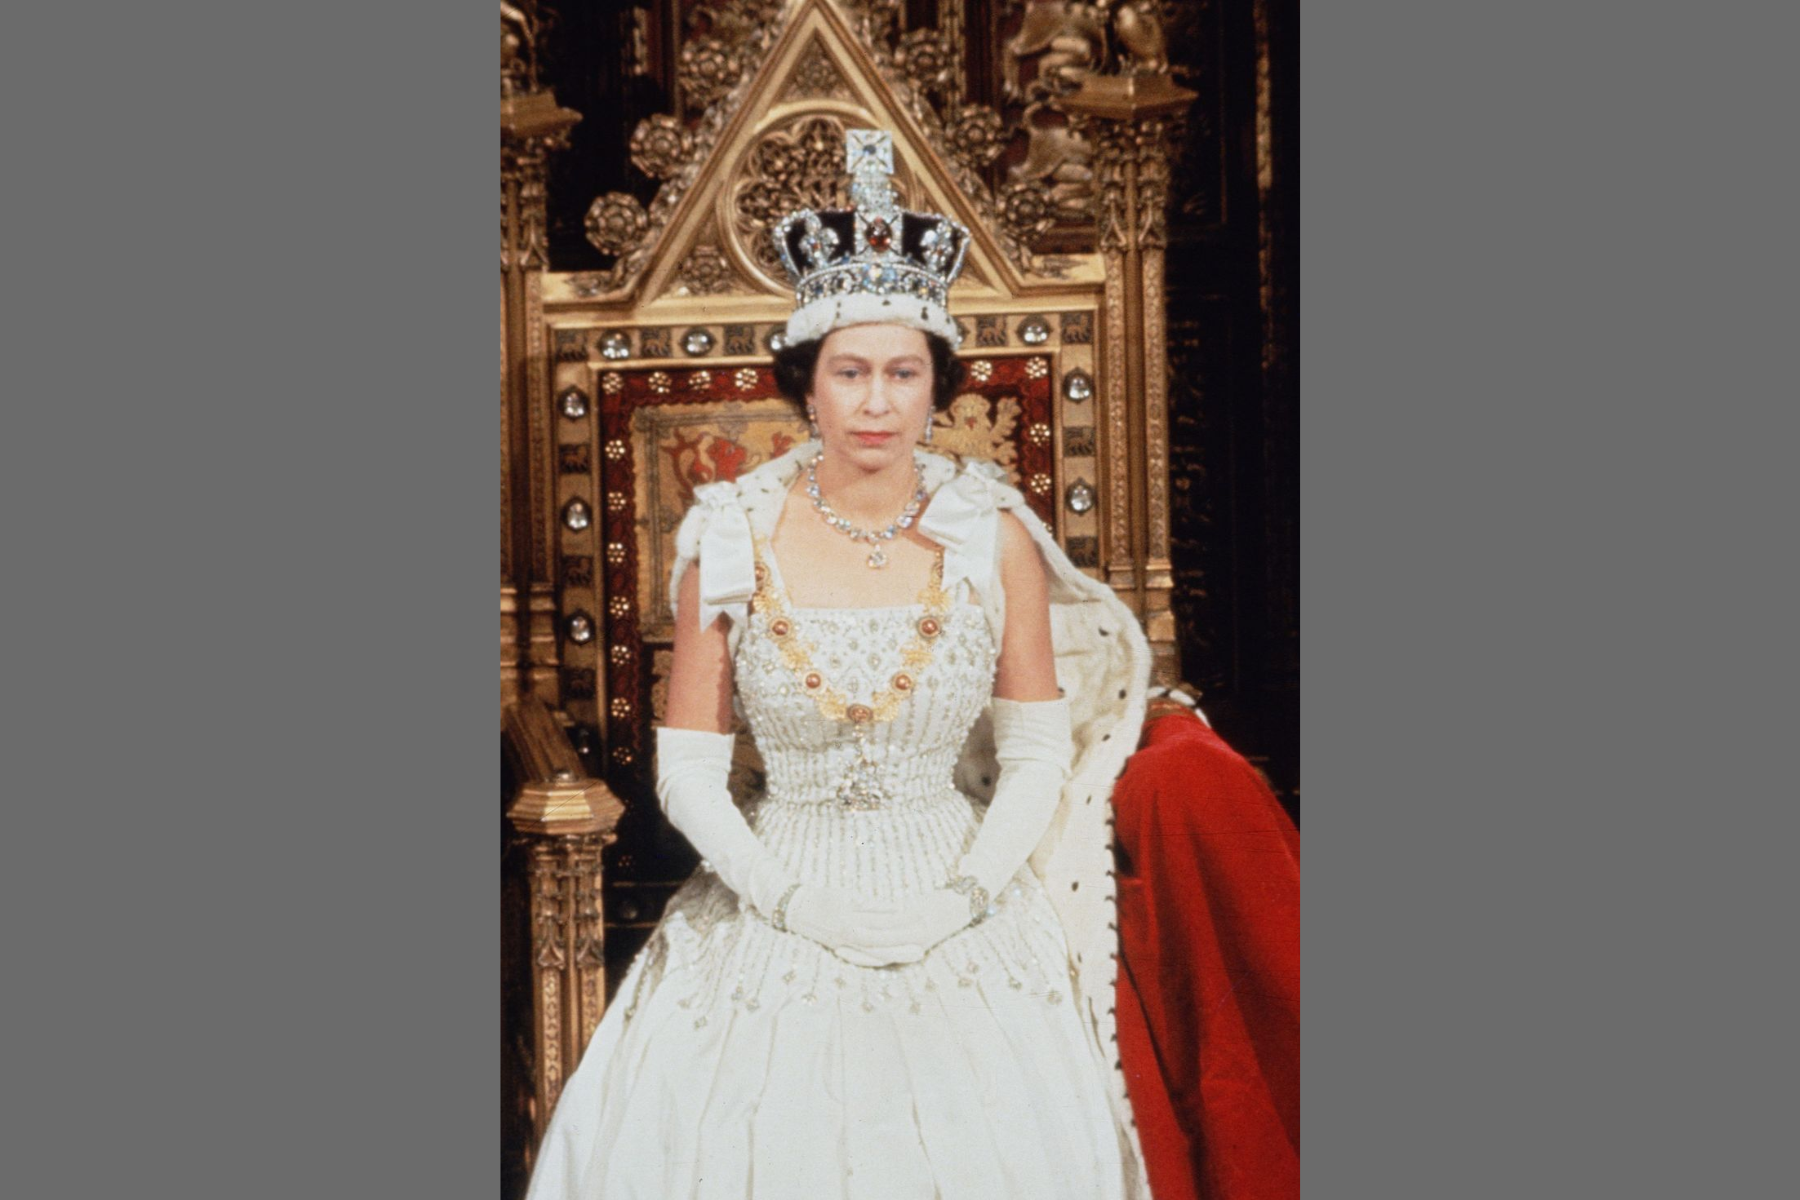 For her coronation, Queen Elizabeth II sat on a throne while wearing the Imperial State Crown